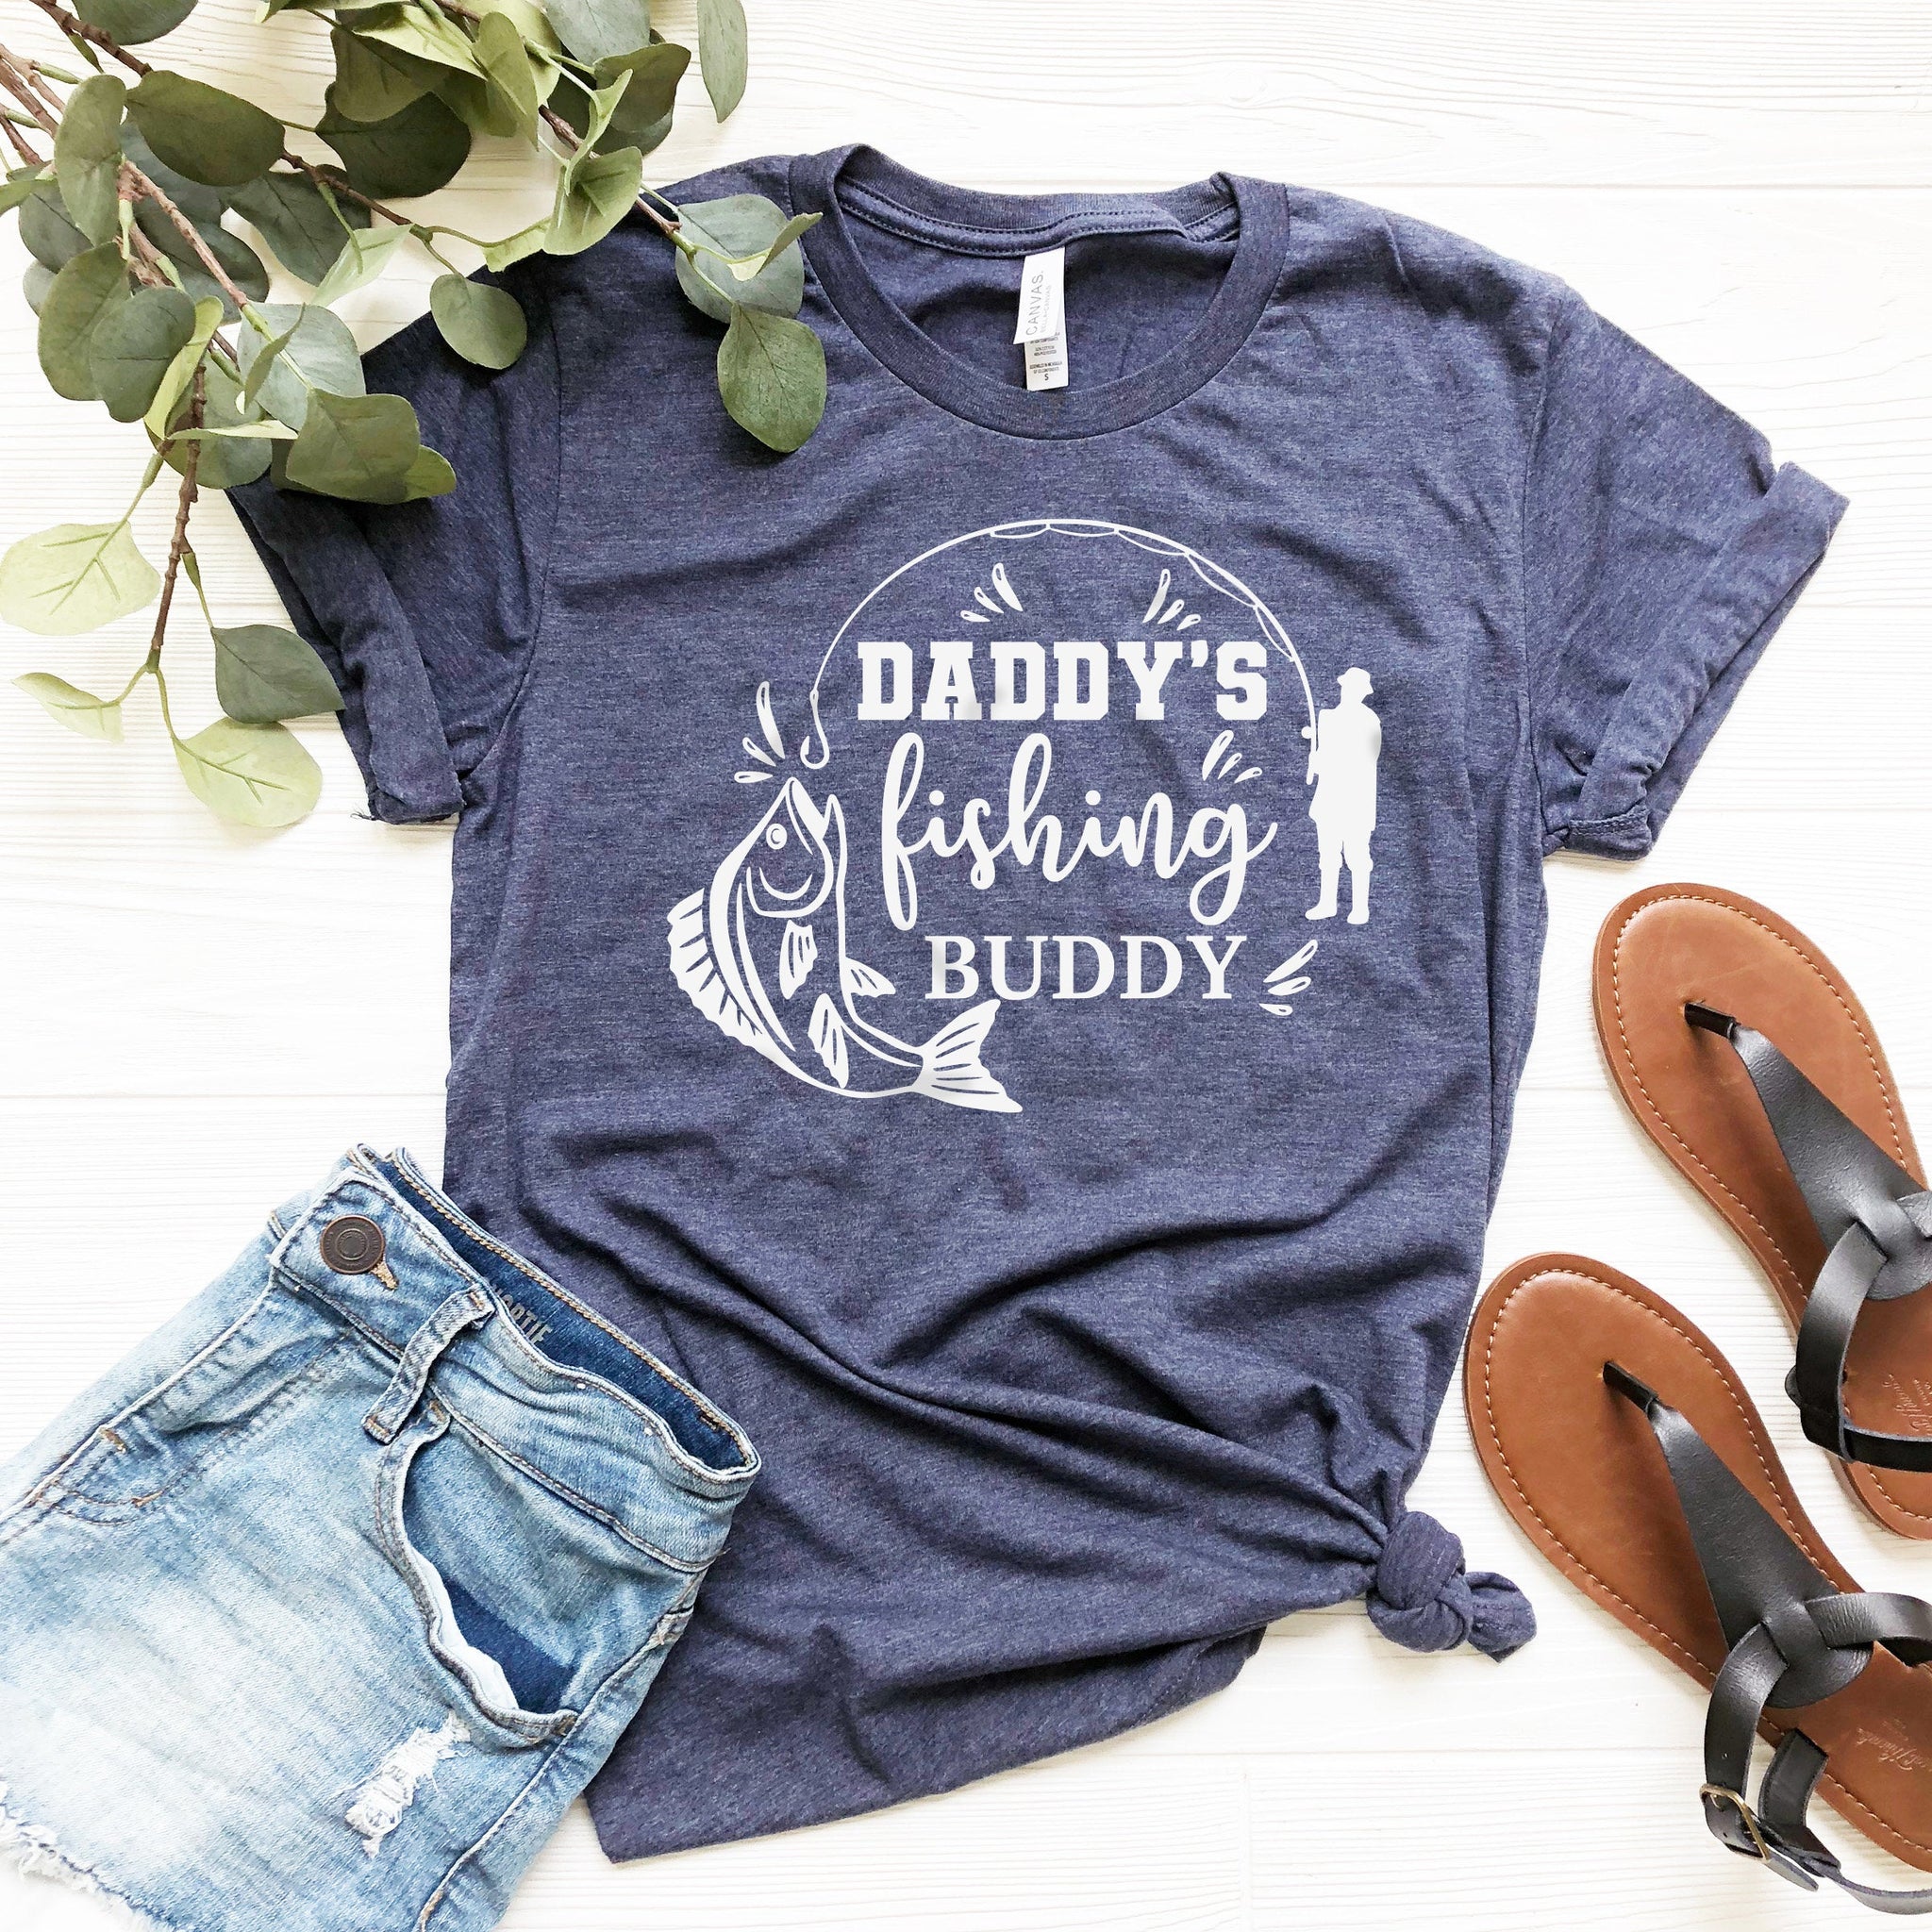 Funny Dad Tshirts for Fathers Day, Dad gift shirts, Dad shirts from daughter, Funny Shirts for dad men husband,Dad Birthday, - Fastdeliverytees.com